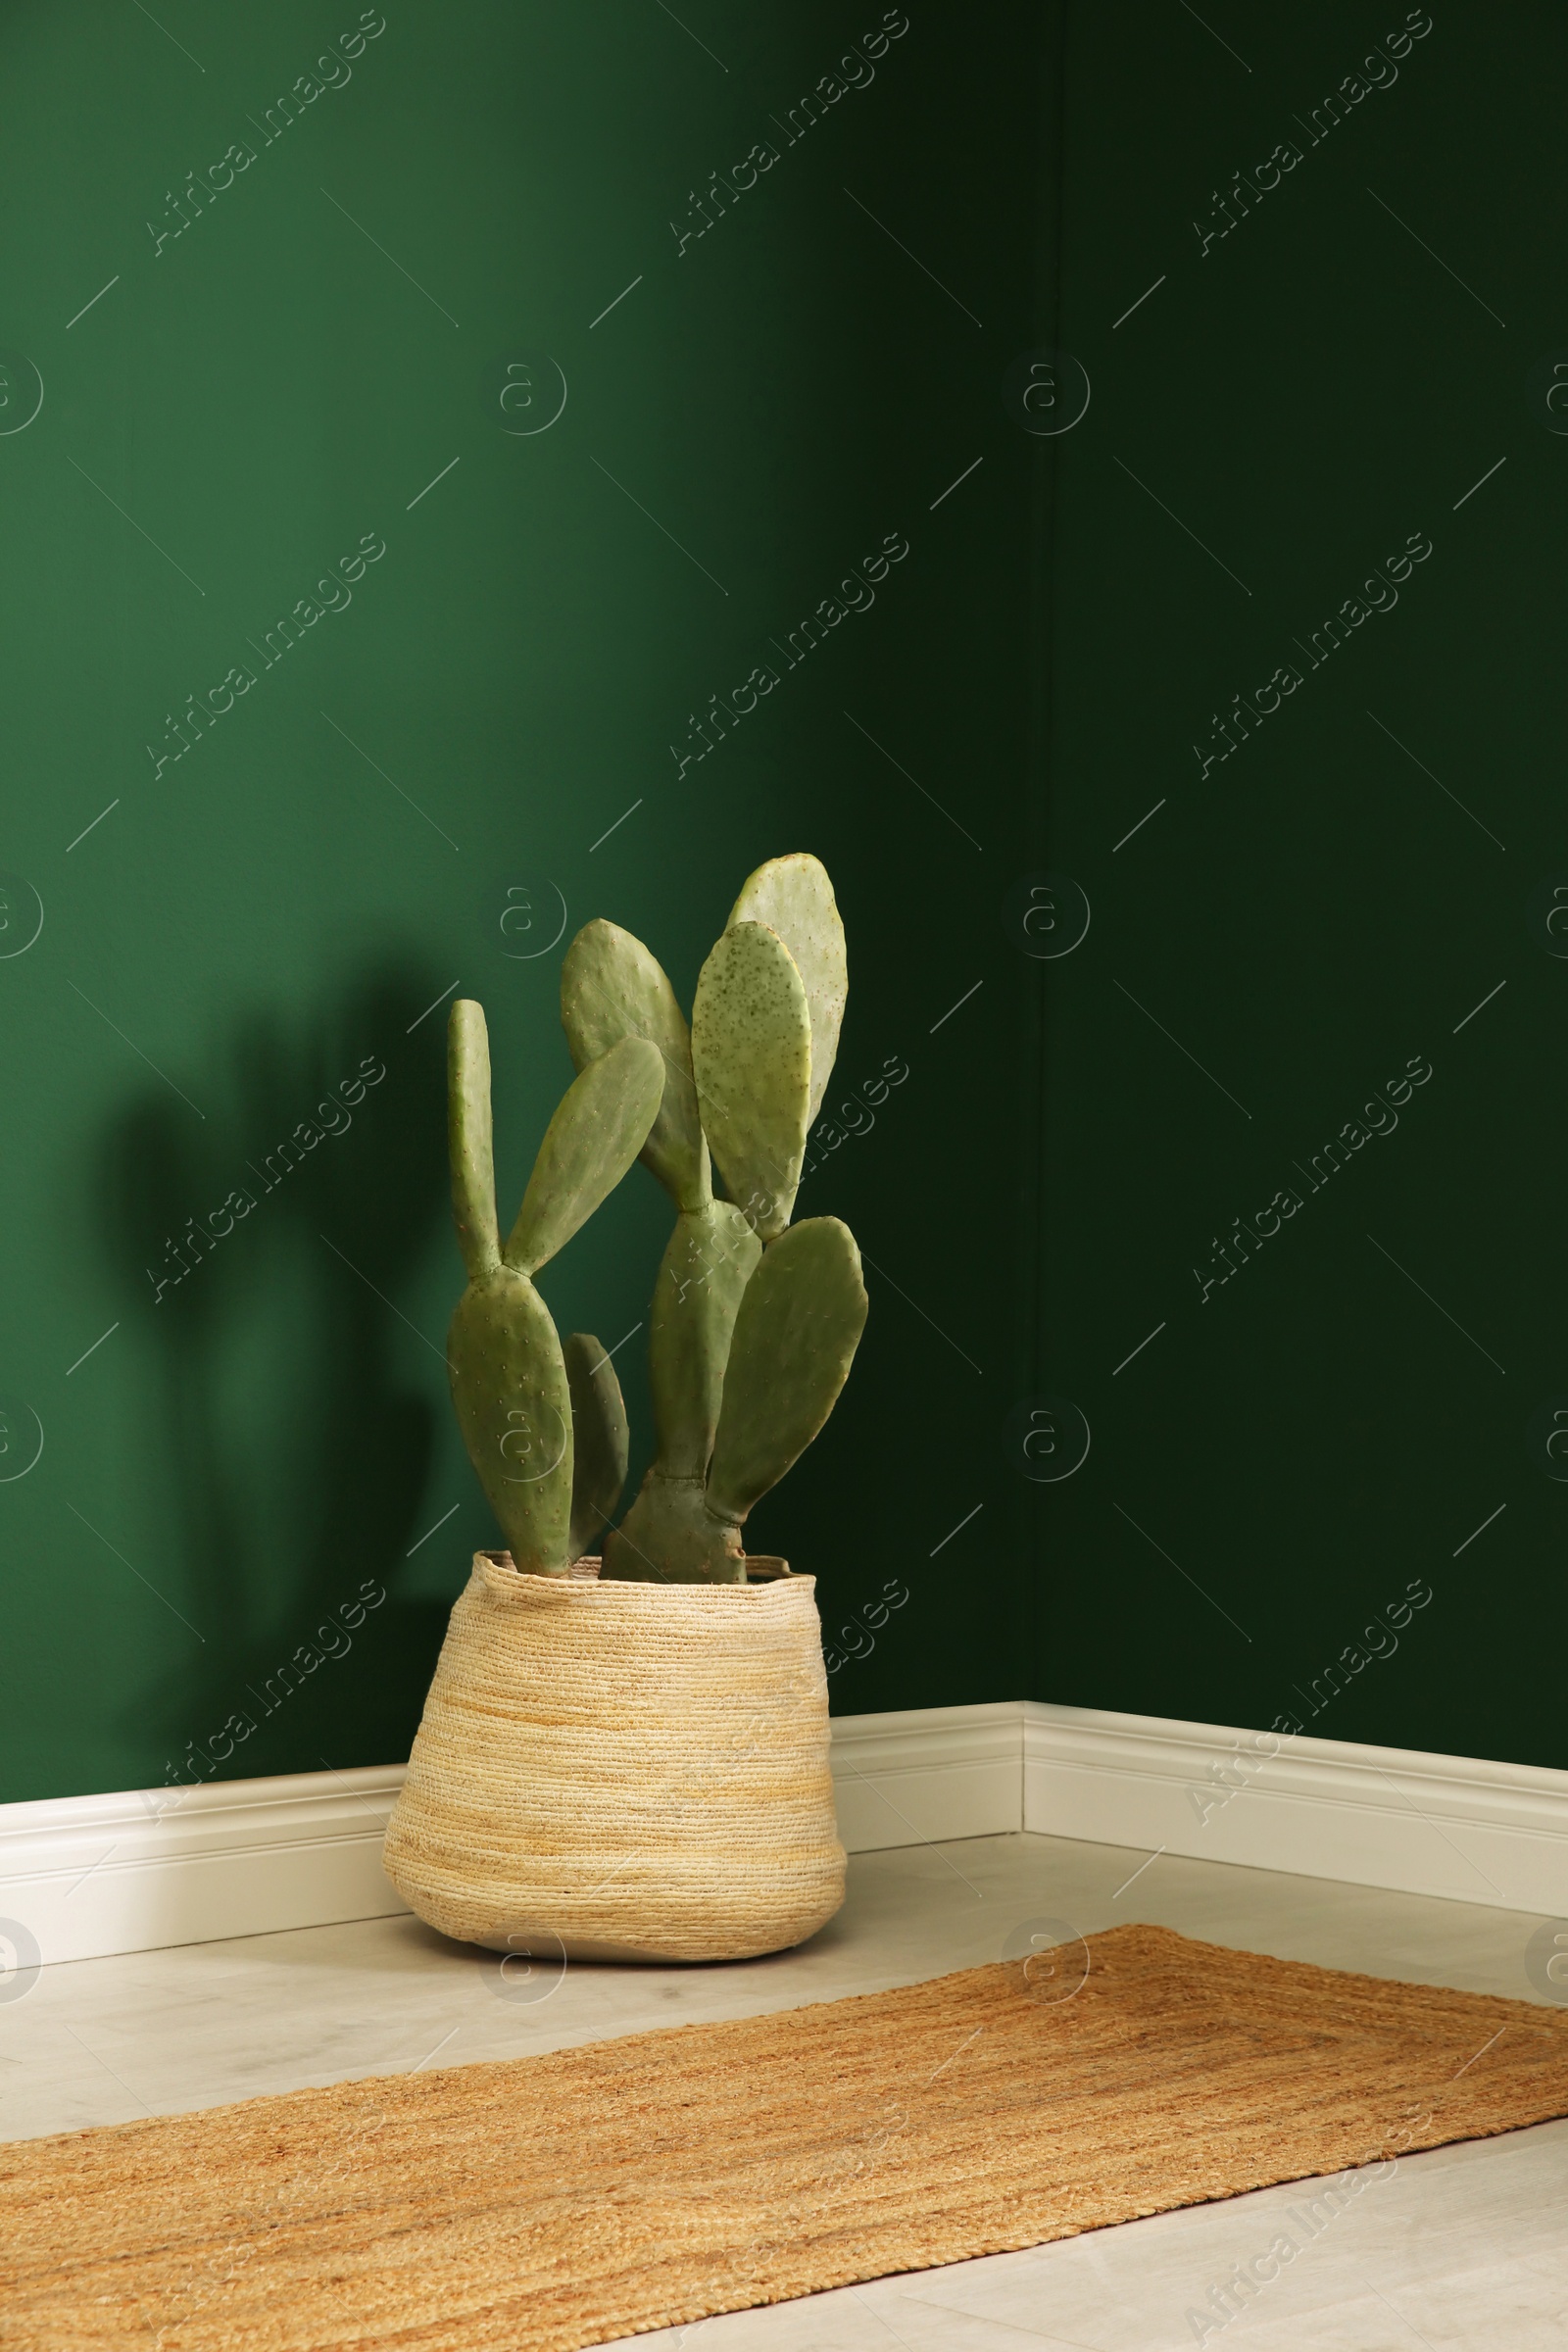 Photo of Potted cactus near green wall in room